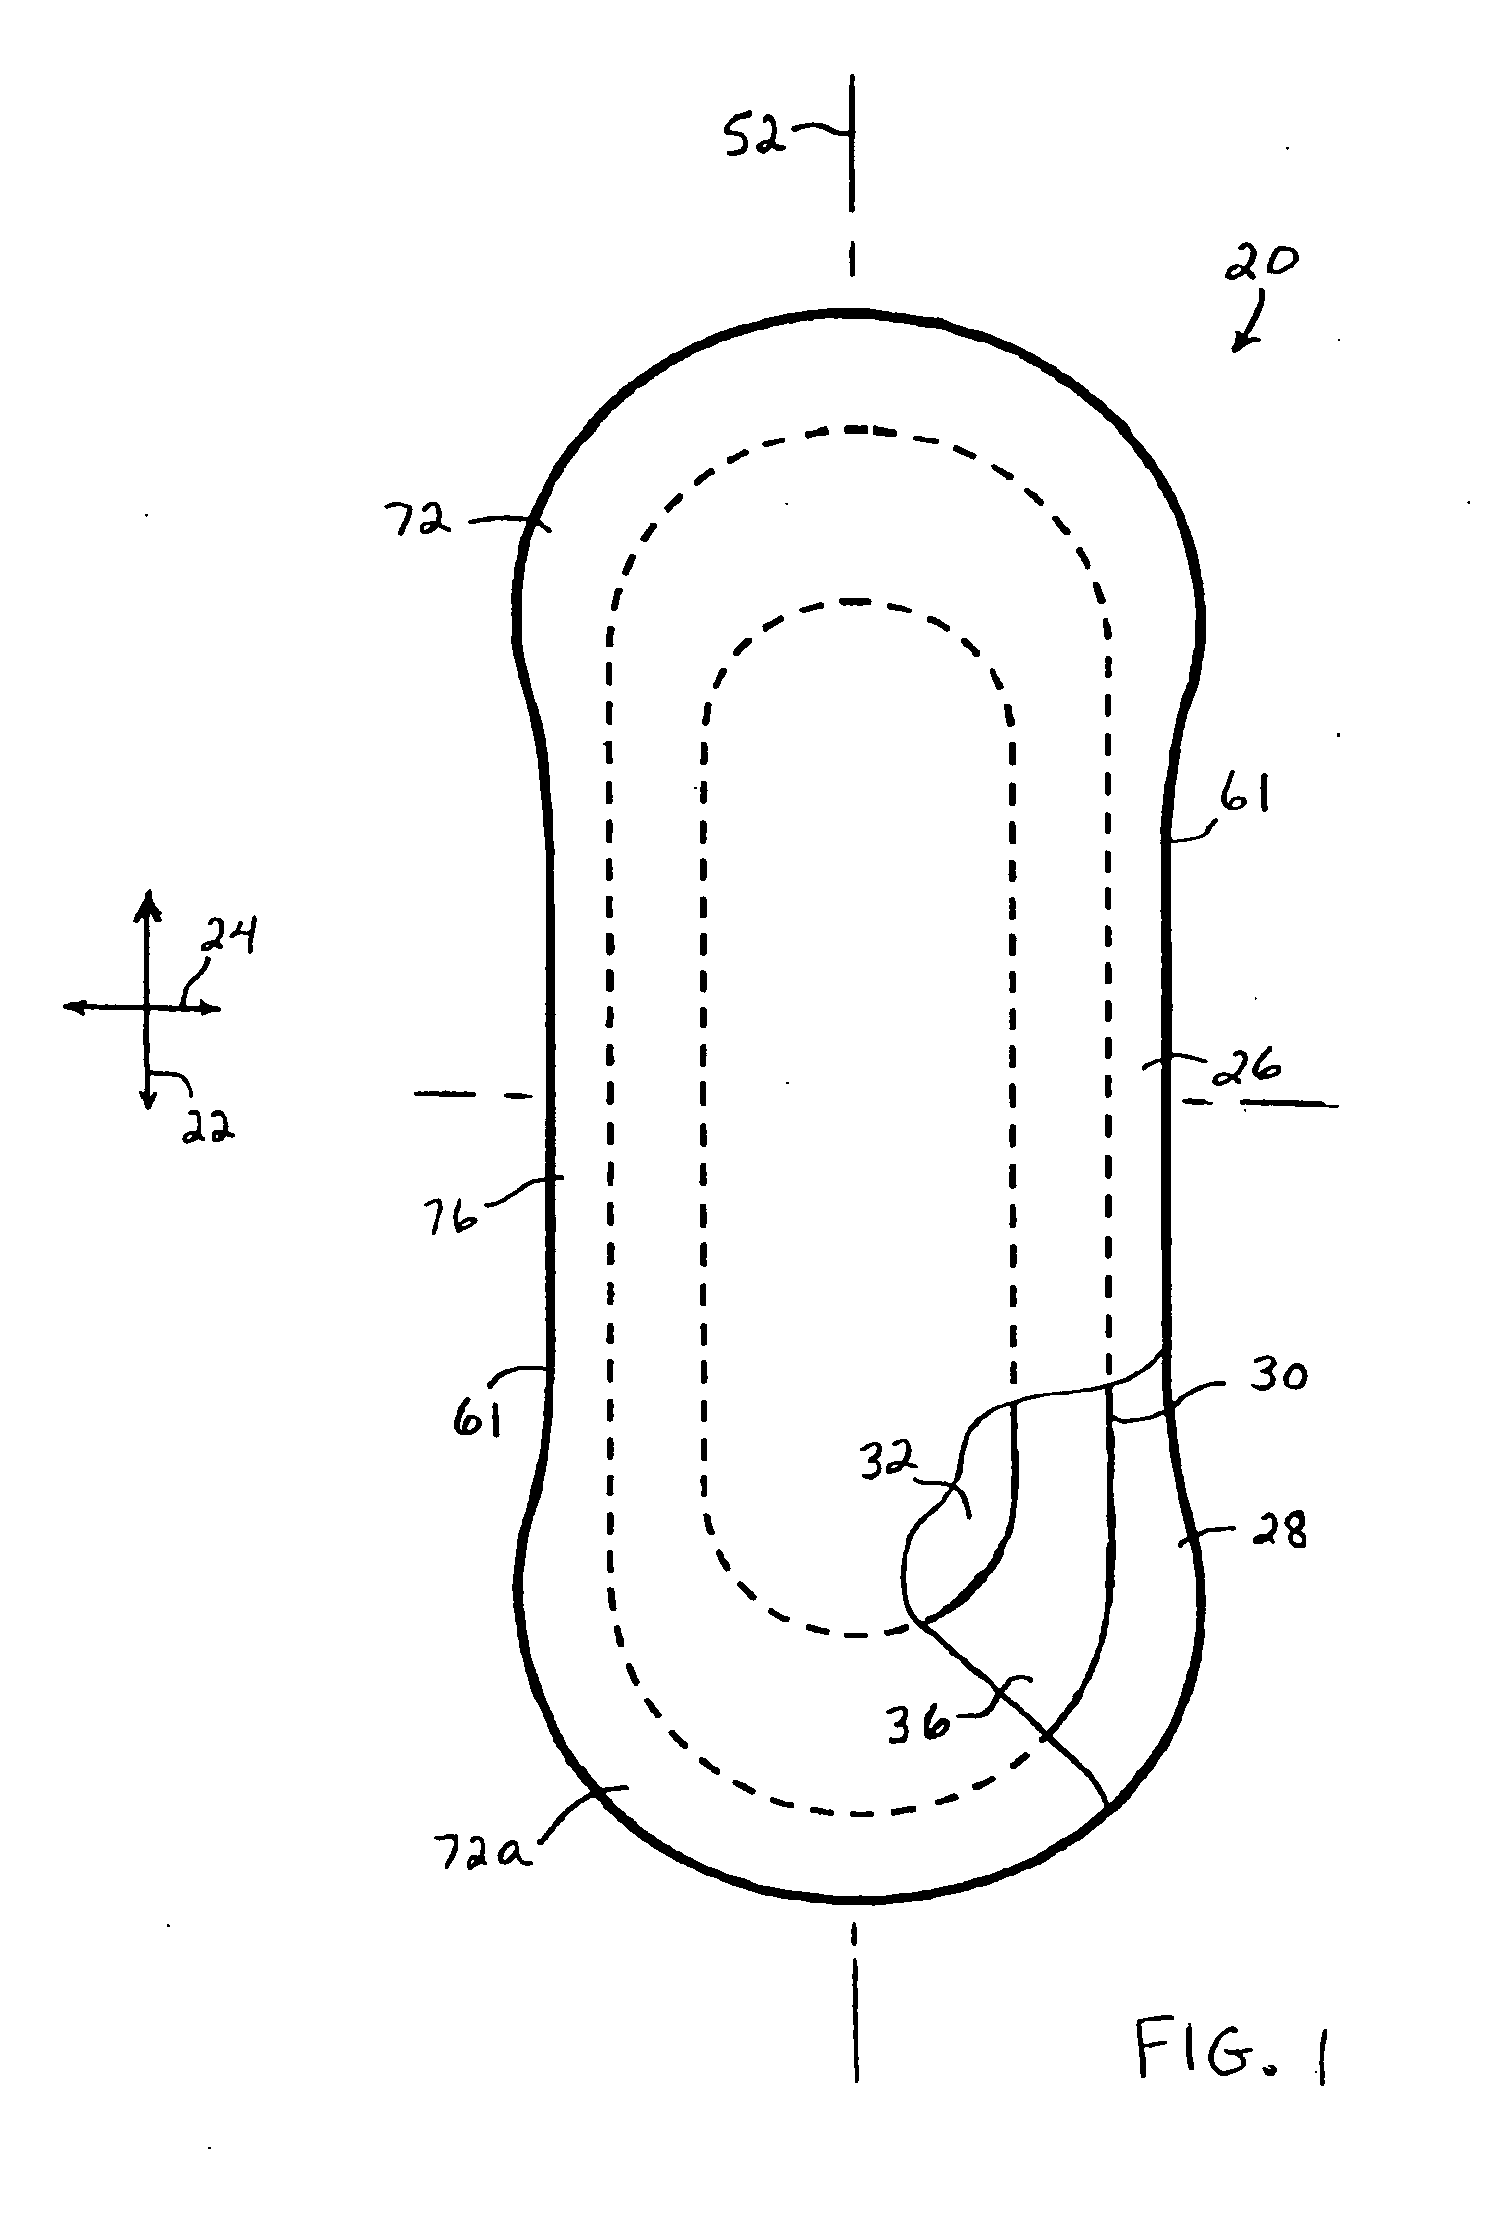 Absorbent article with lengthwise, compact-fold and wrap layer